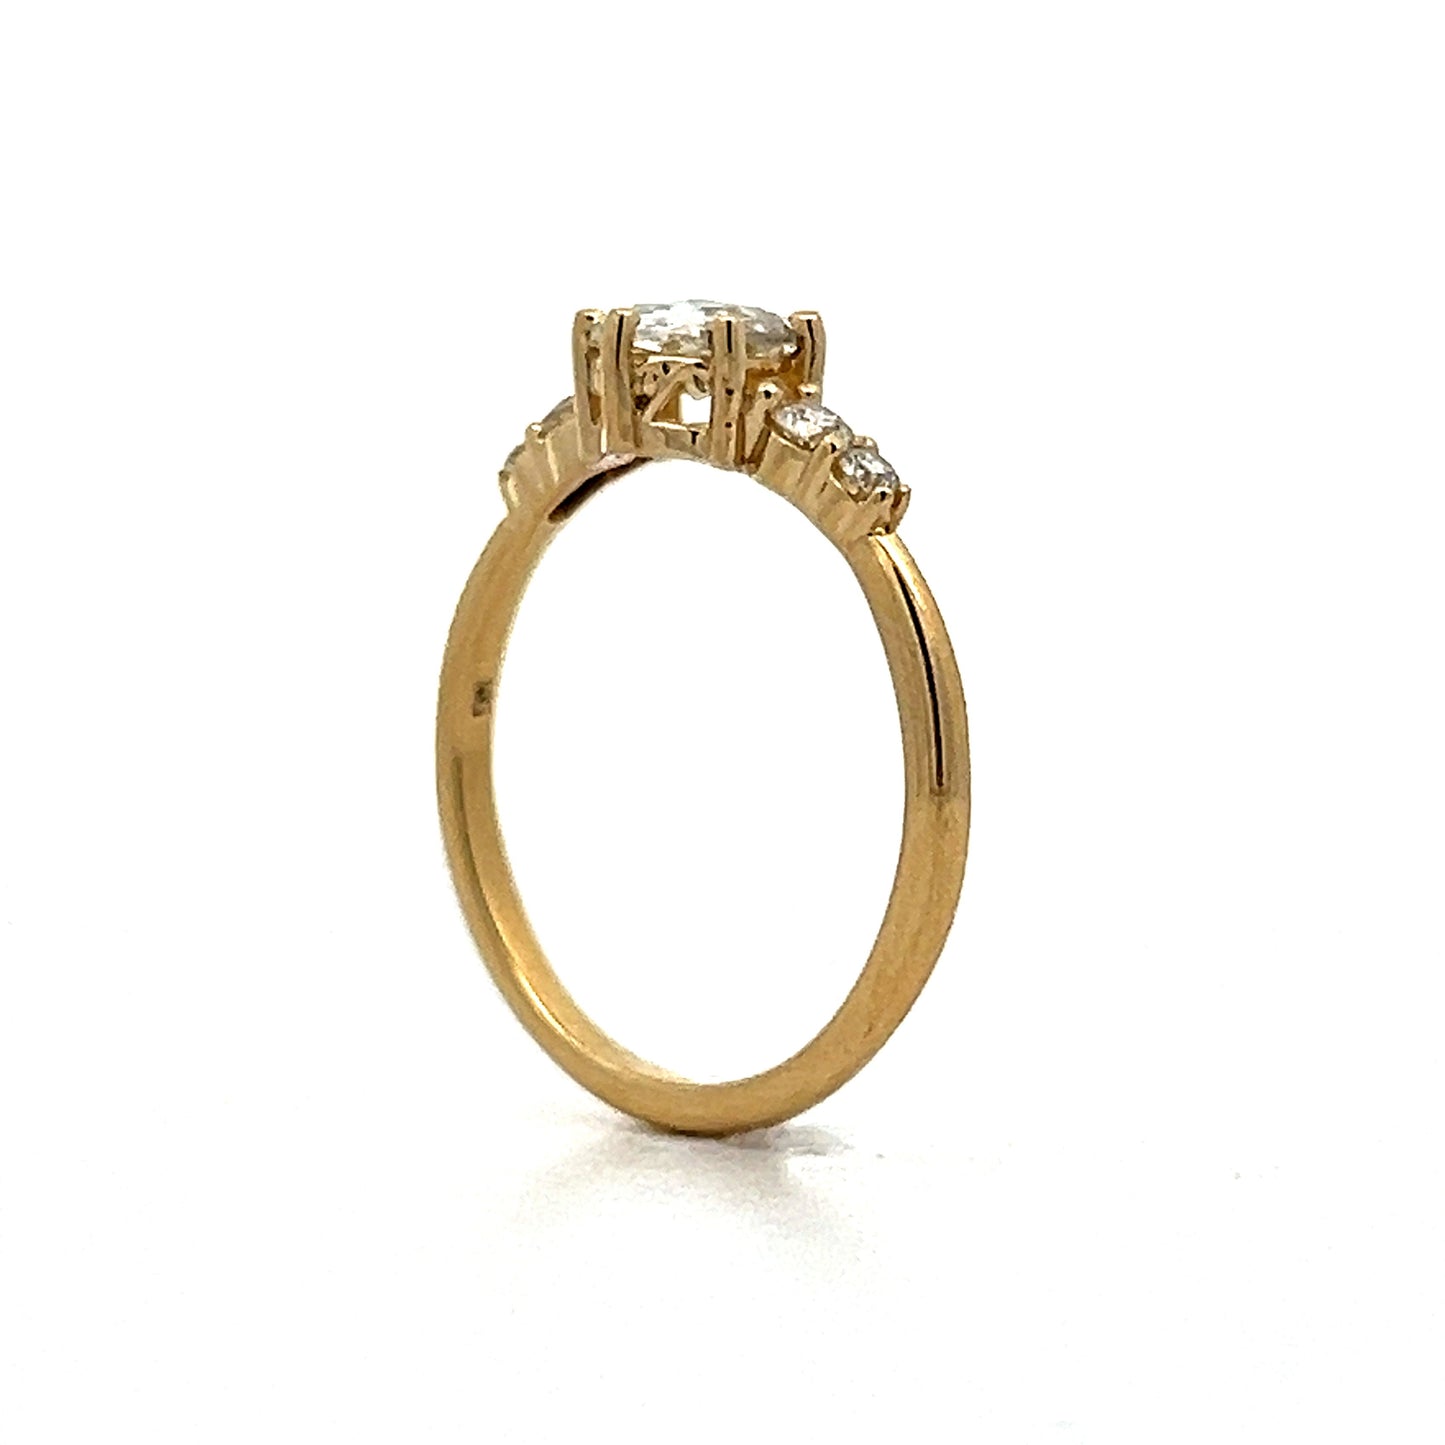 .82 Rose Cut Diamond Engagement Ring in Yellow Gold